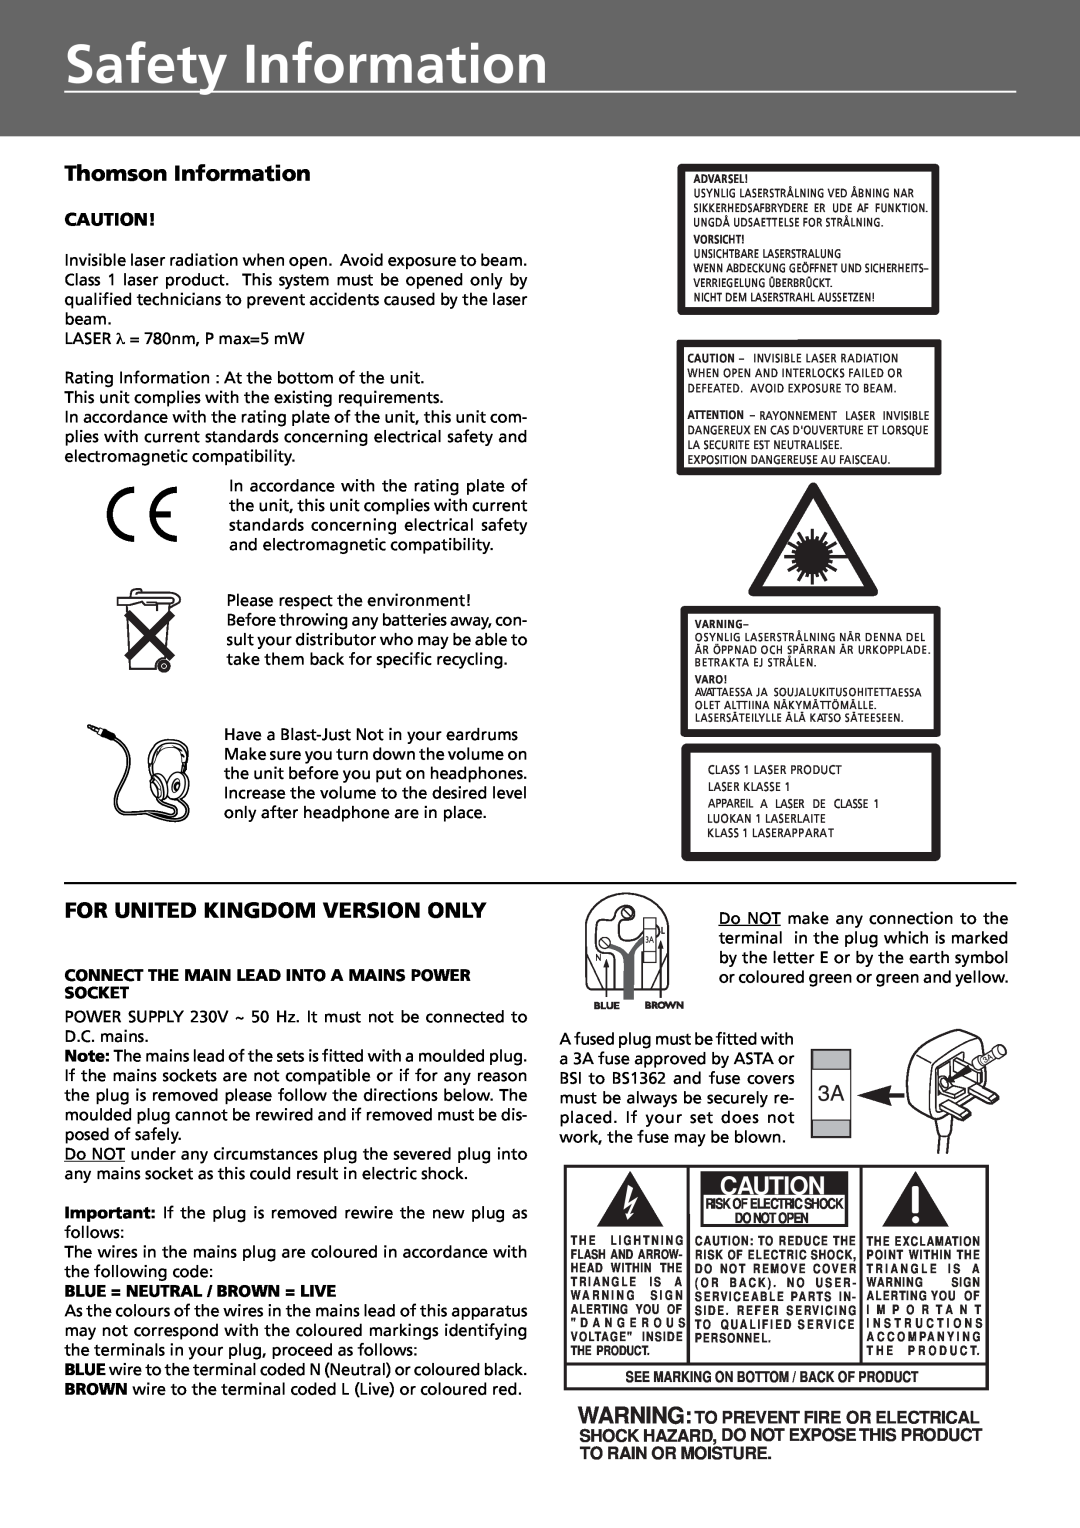 Technicolor - Thomson DPL909VD manual Safety Information, Thomson Information, For United Kingdom Version Only 